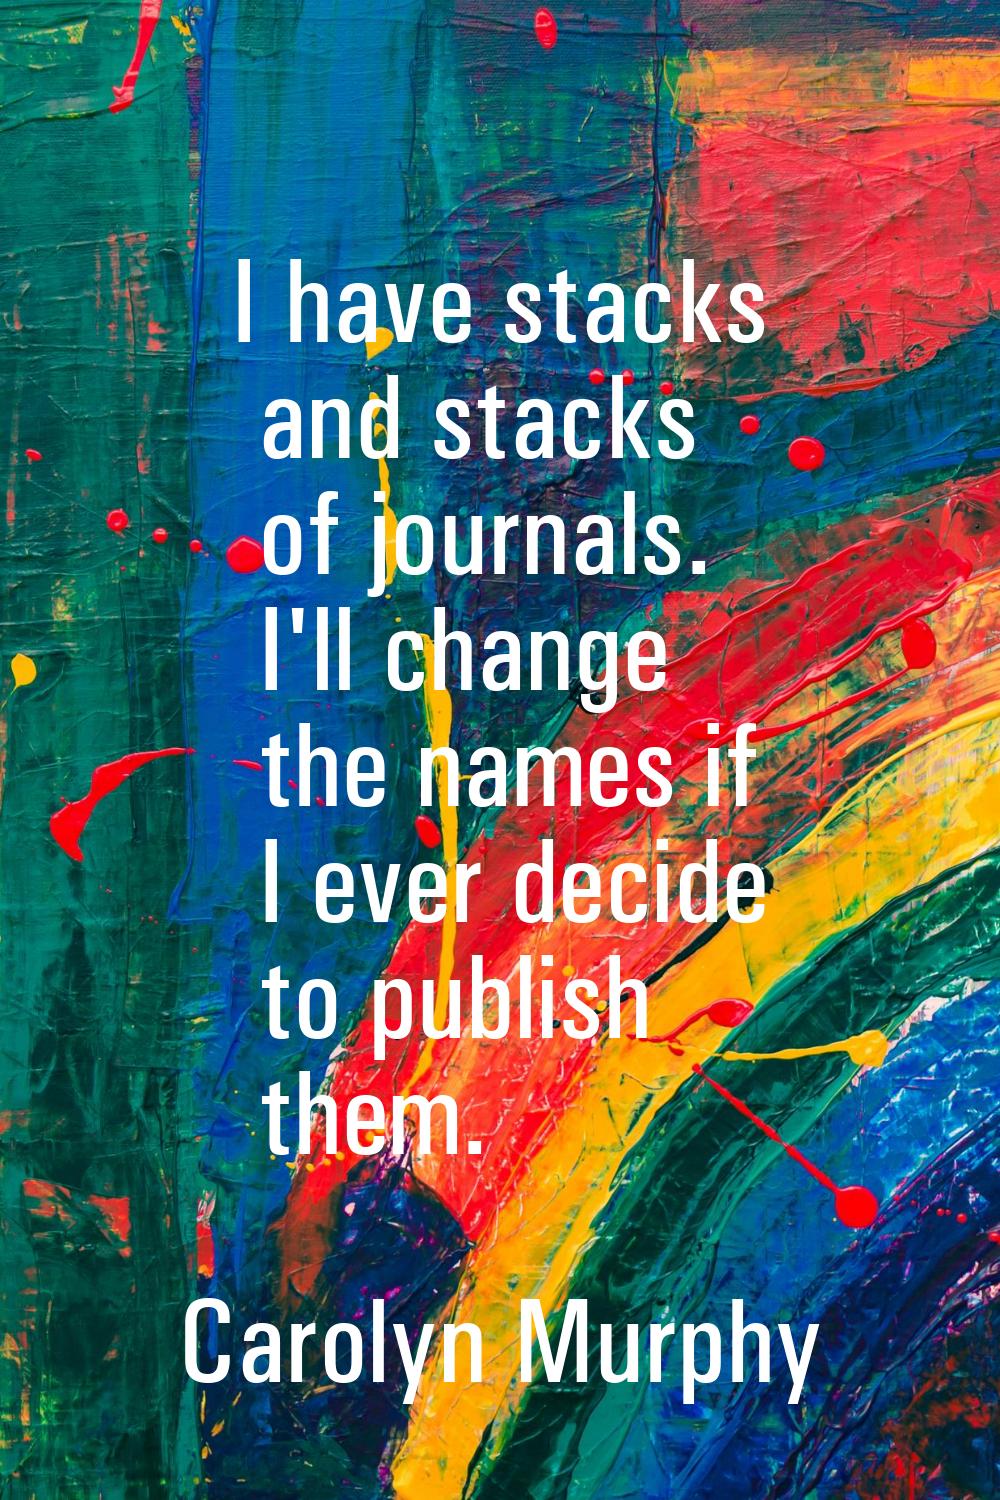 I have stacks and stacks of journals. I'll change the names if I ever decide to publish them.